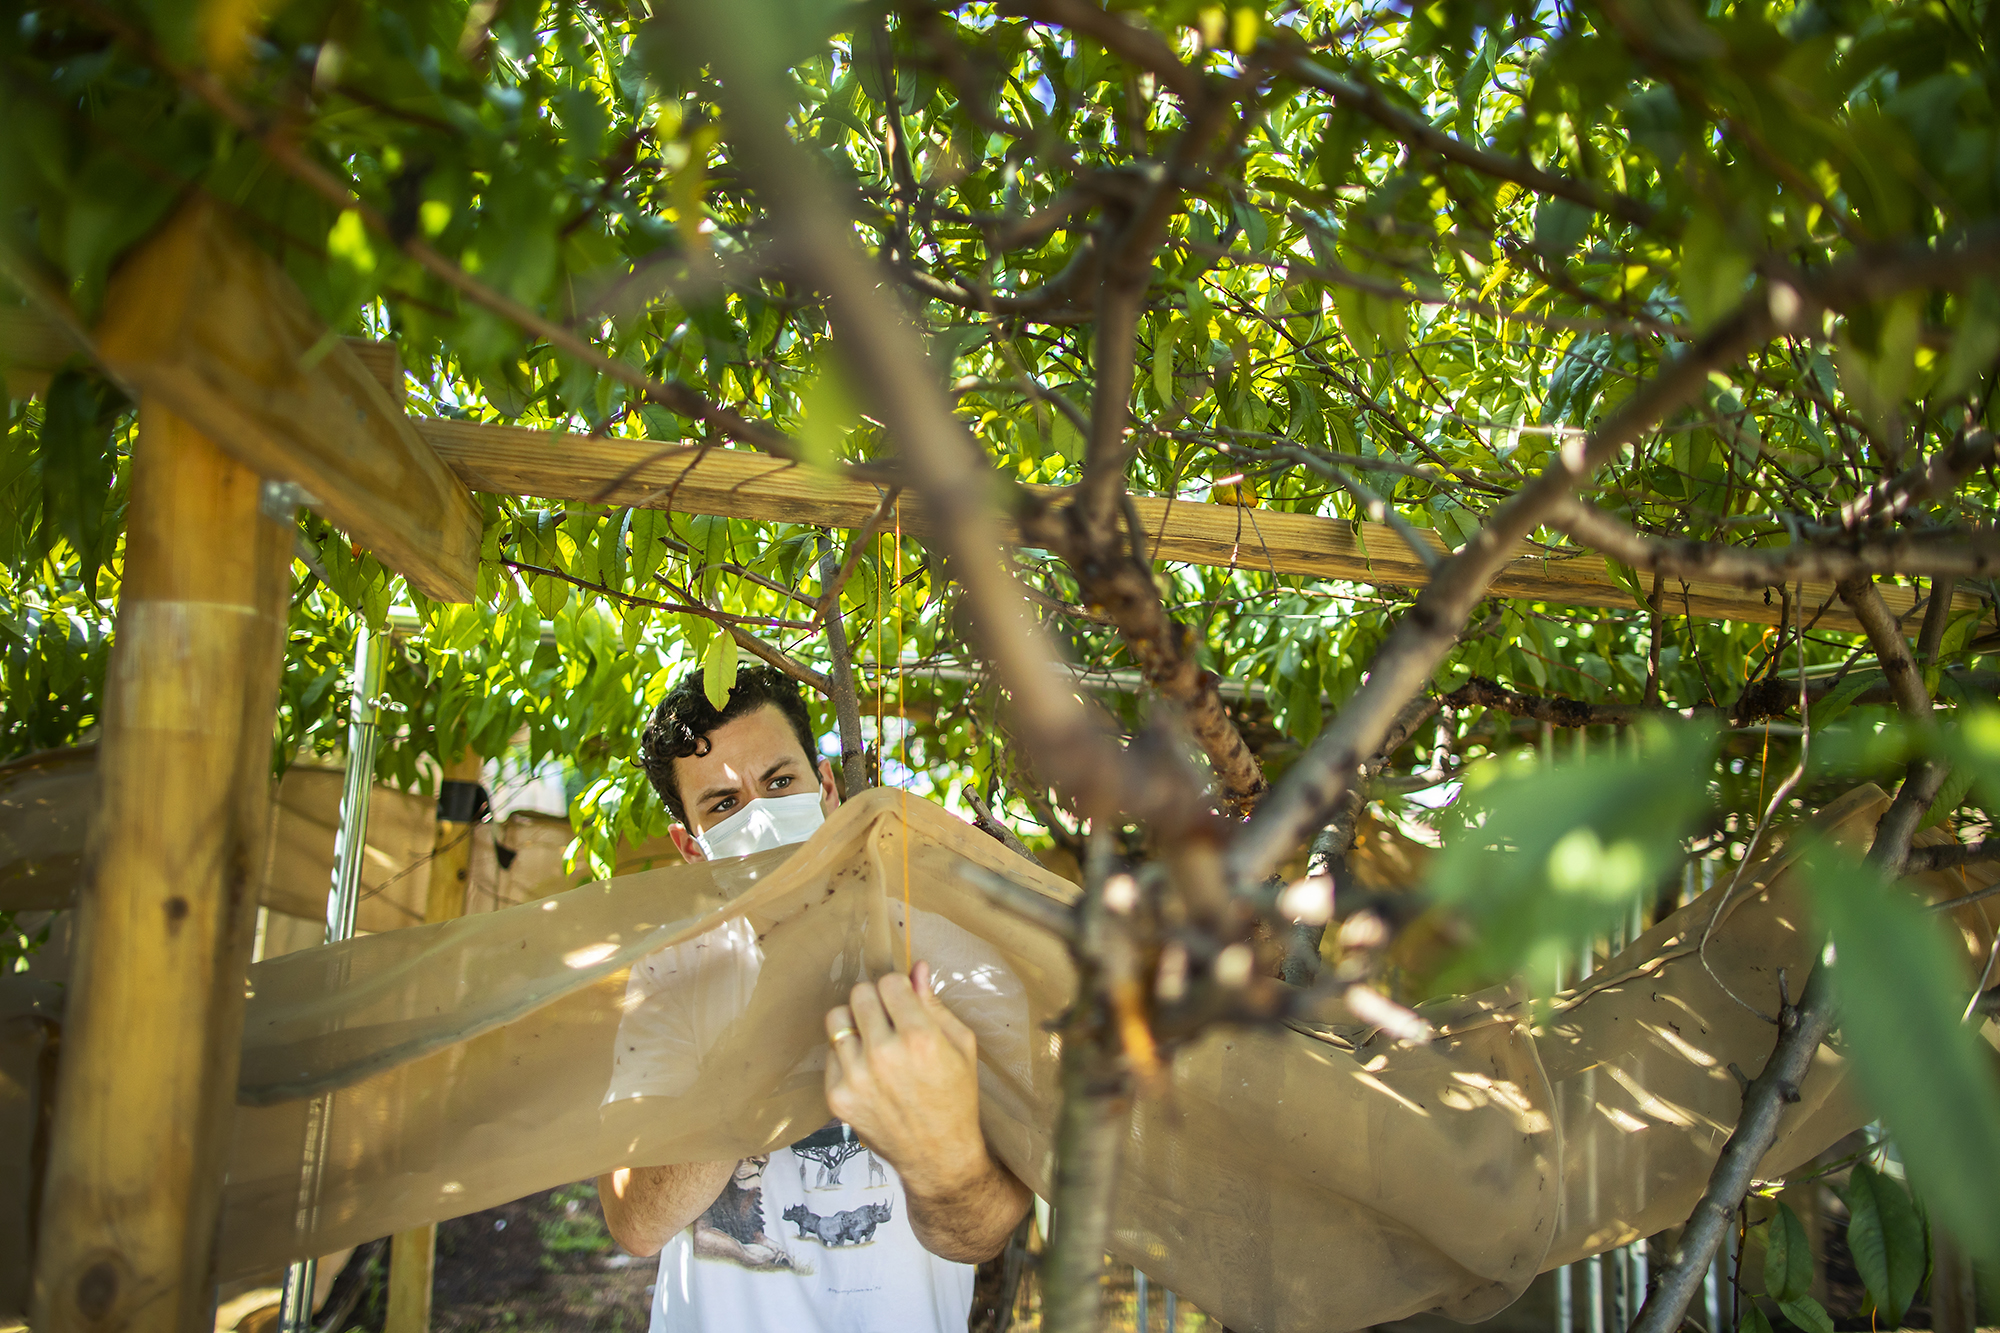 a person in a mask looking at bugs on a tarp below a canopy of tree branches